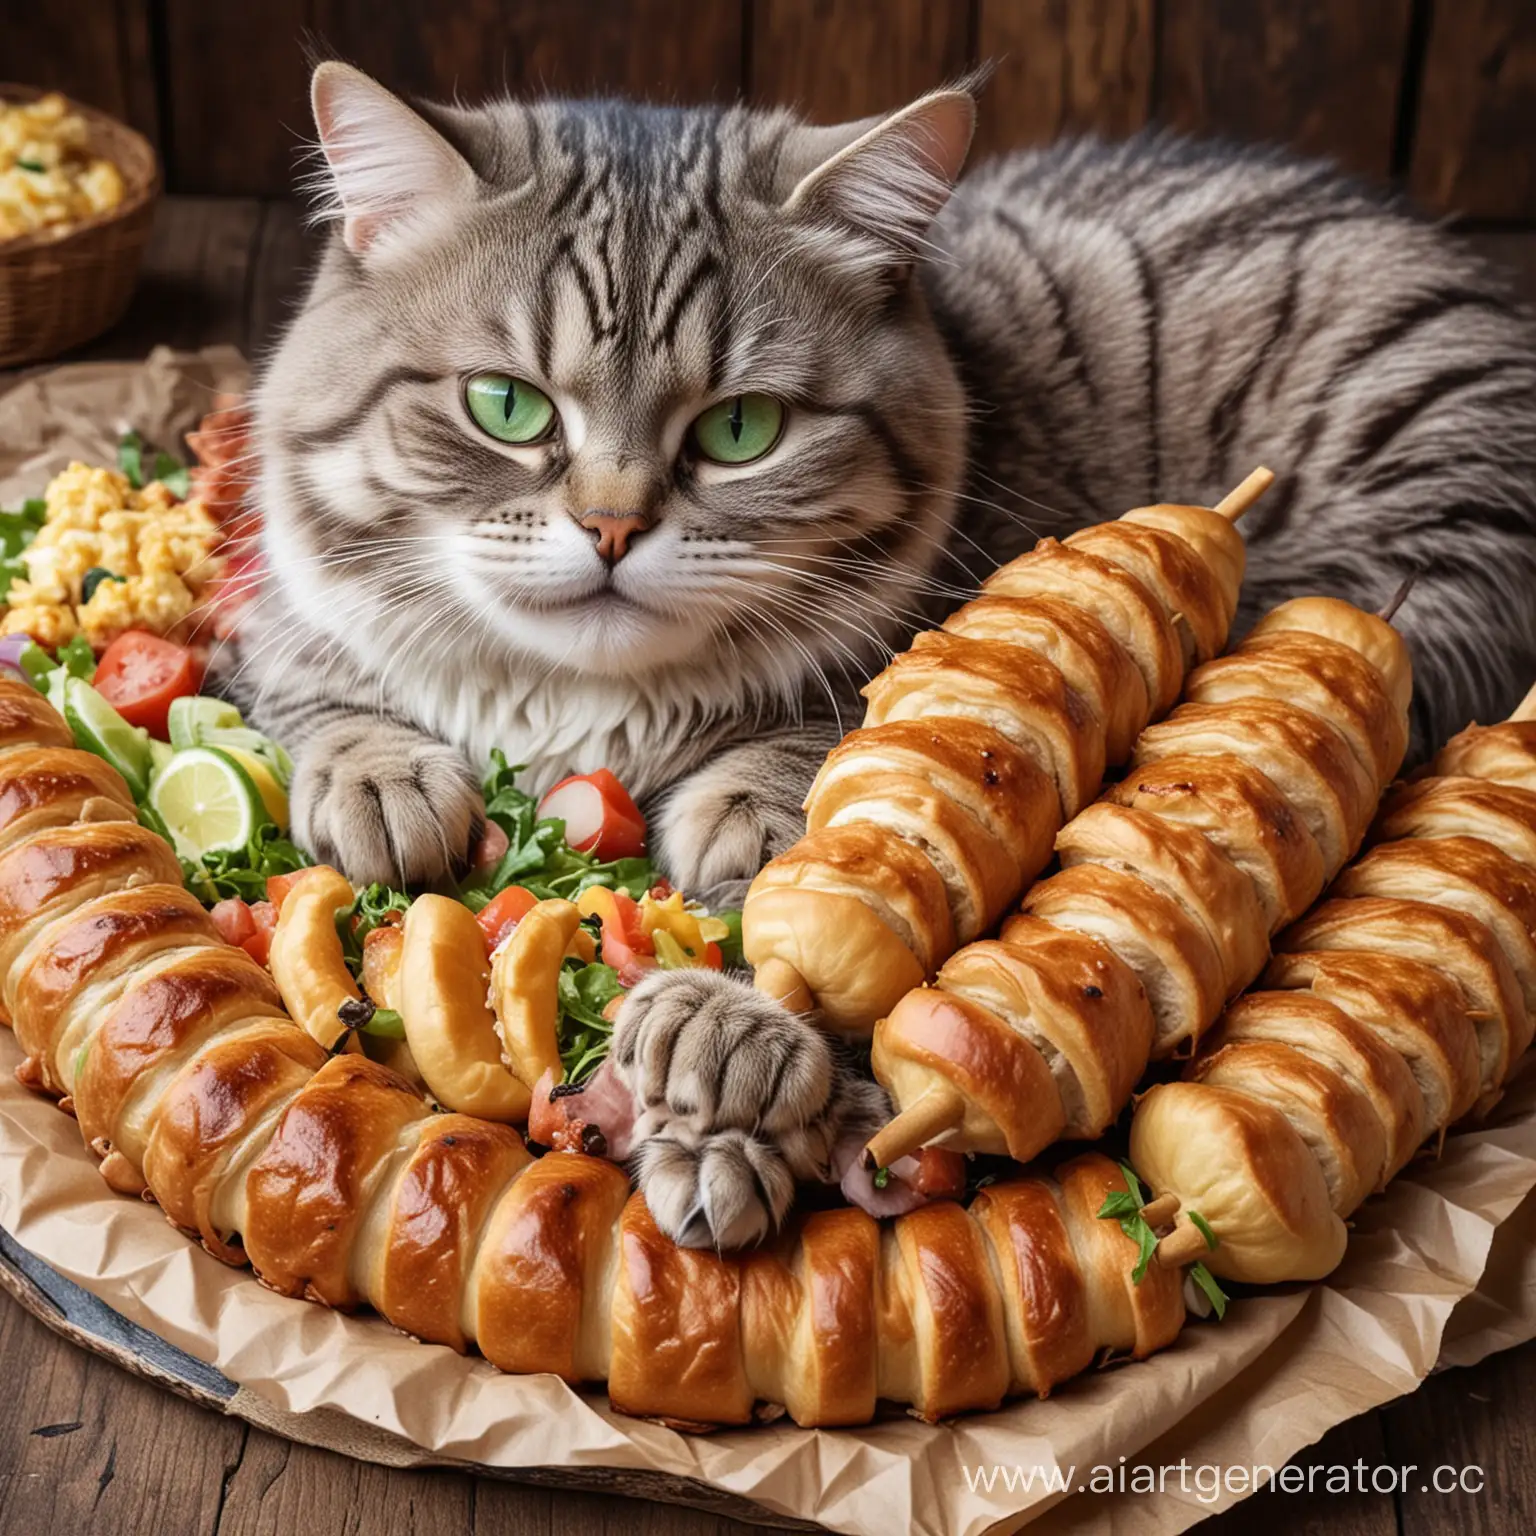 Cheshire-Cat-with-Enchanting-Green-Eyes-Holding-a-Kebab